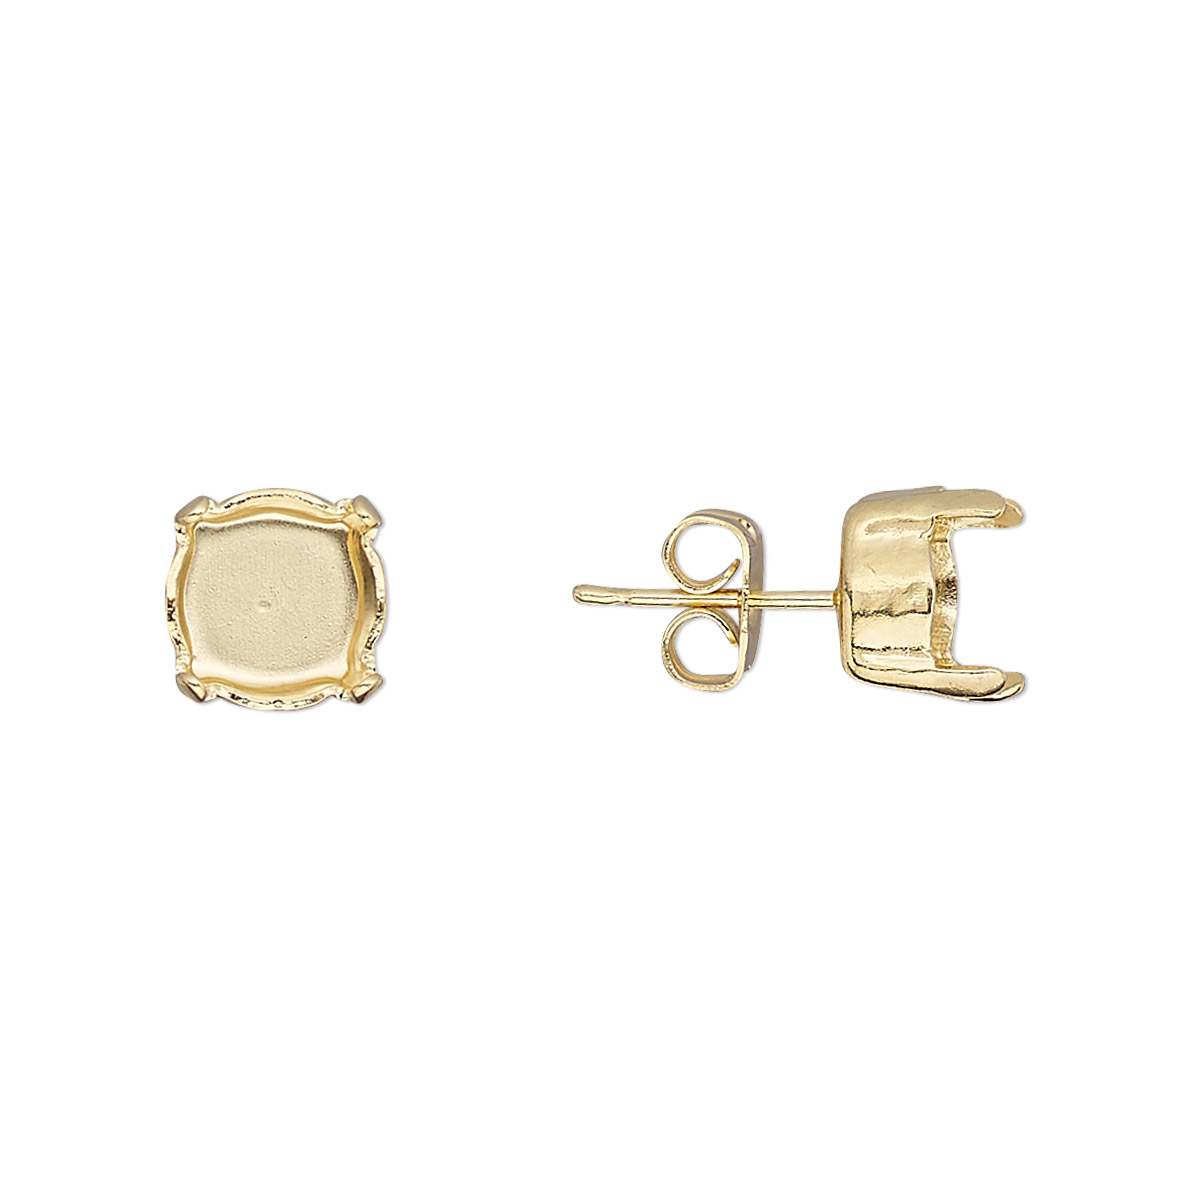 Earstud, gold-plated brass and steel, 8mm with post and SS39 4-prong ...